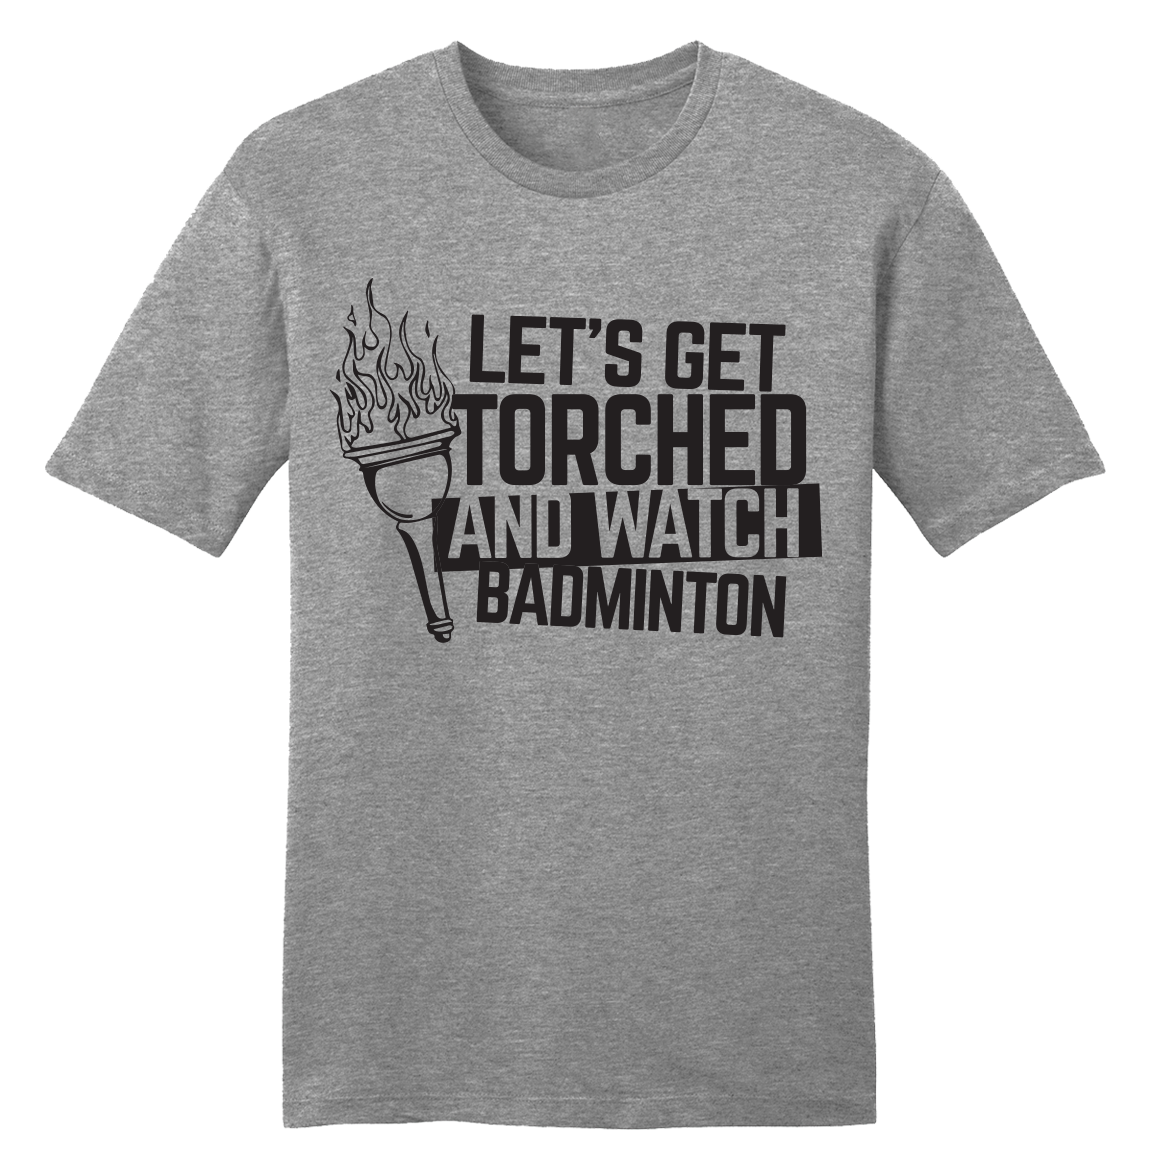 Let's Get Torched and Watch Badminton tee